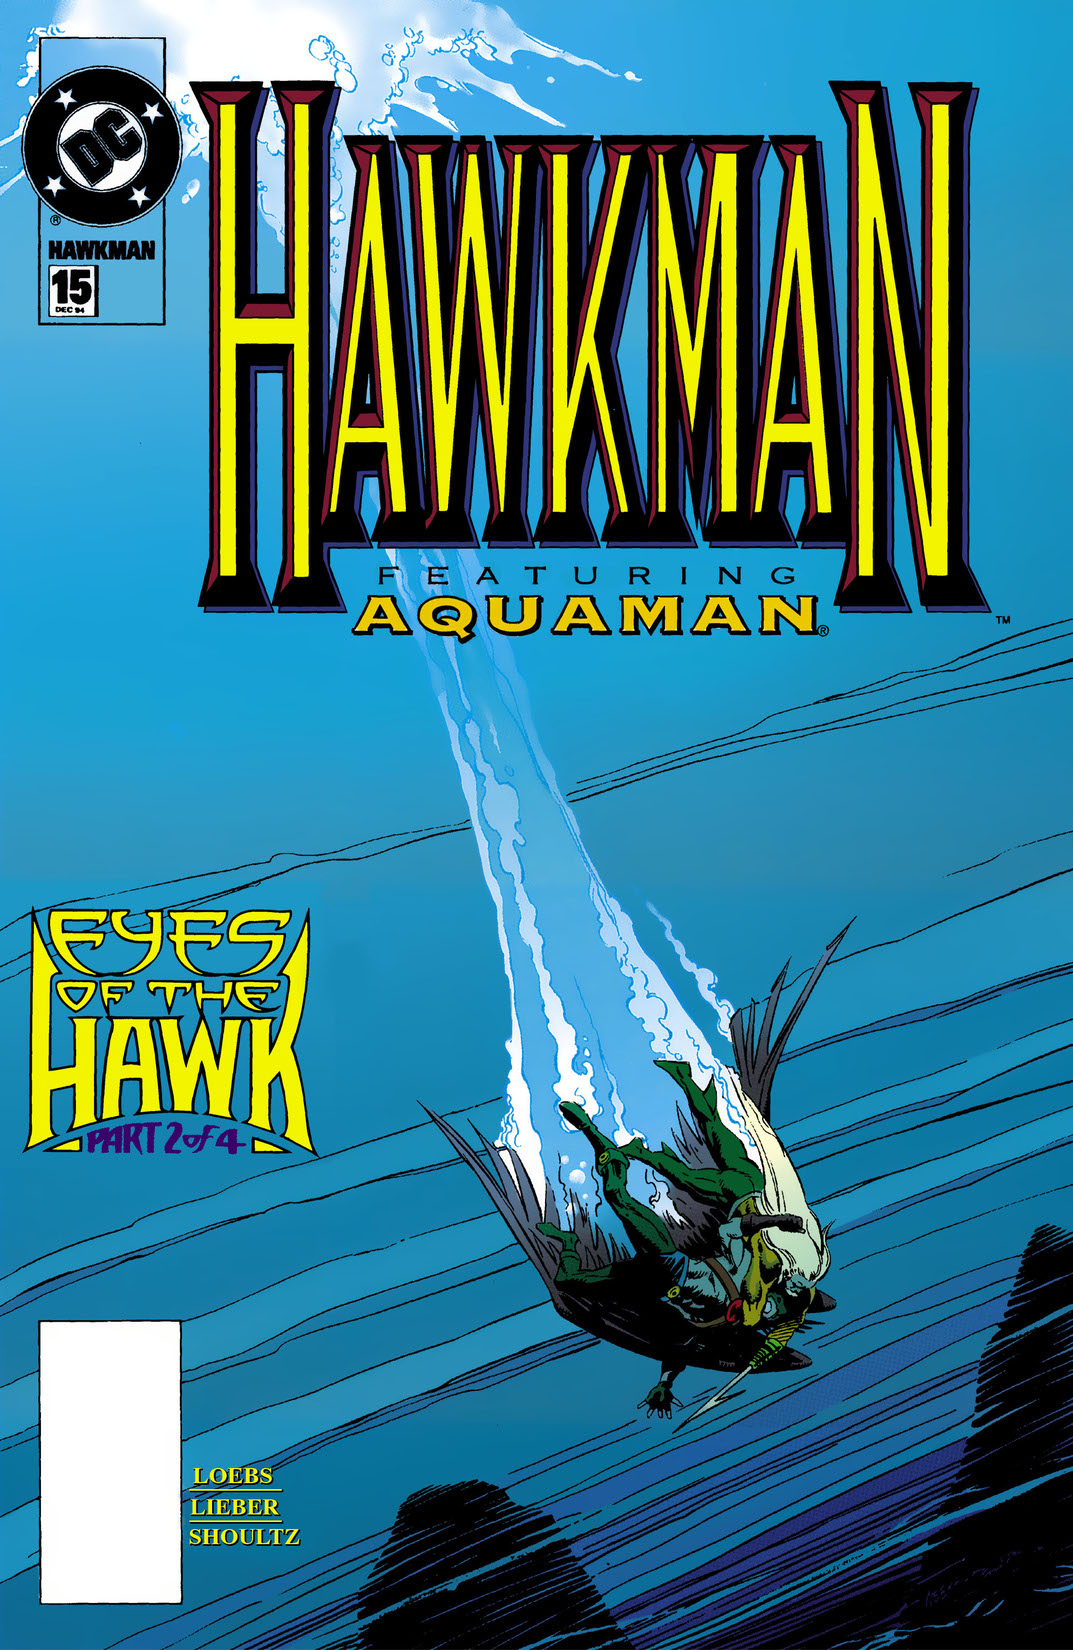 Hawkman (1993-) #15 preview images